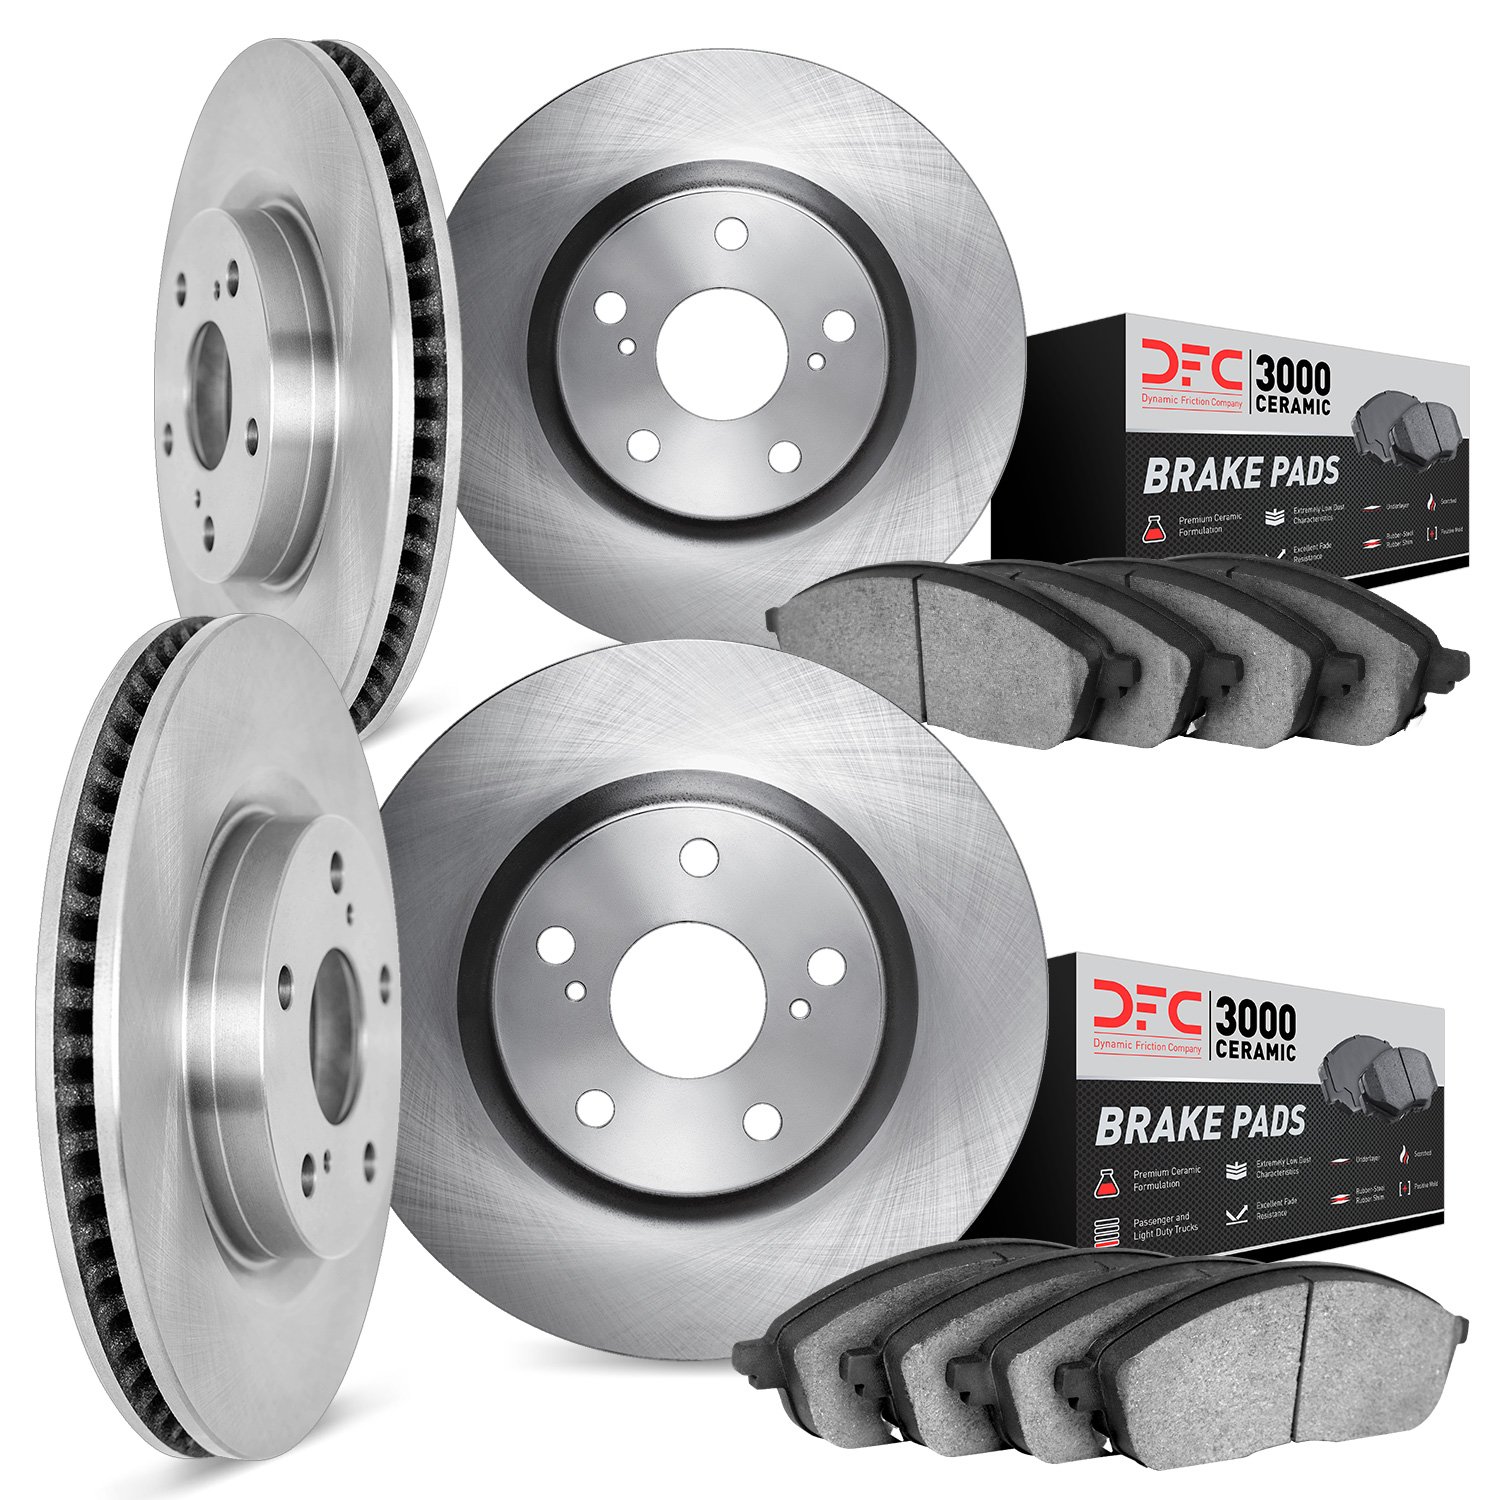 6304-76030 Brake Rotors with 3000-Series Ceramic Brake Pads Kit, 1991-1996 Lexus/Toyota/Scion, Position: Front and Rear